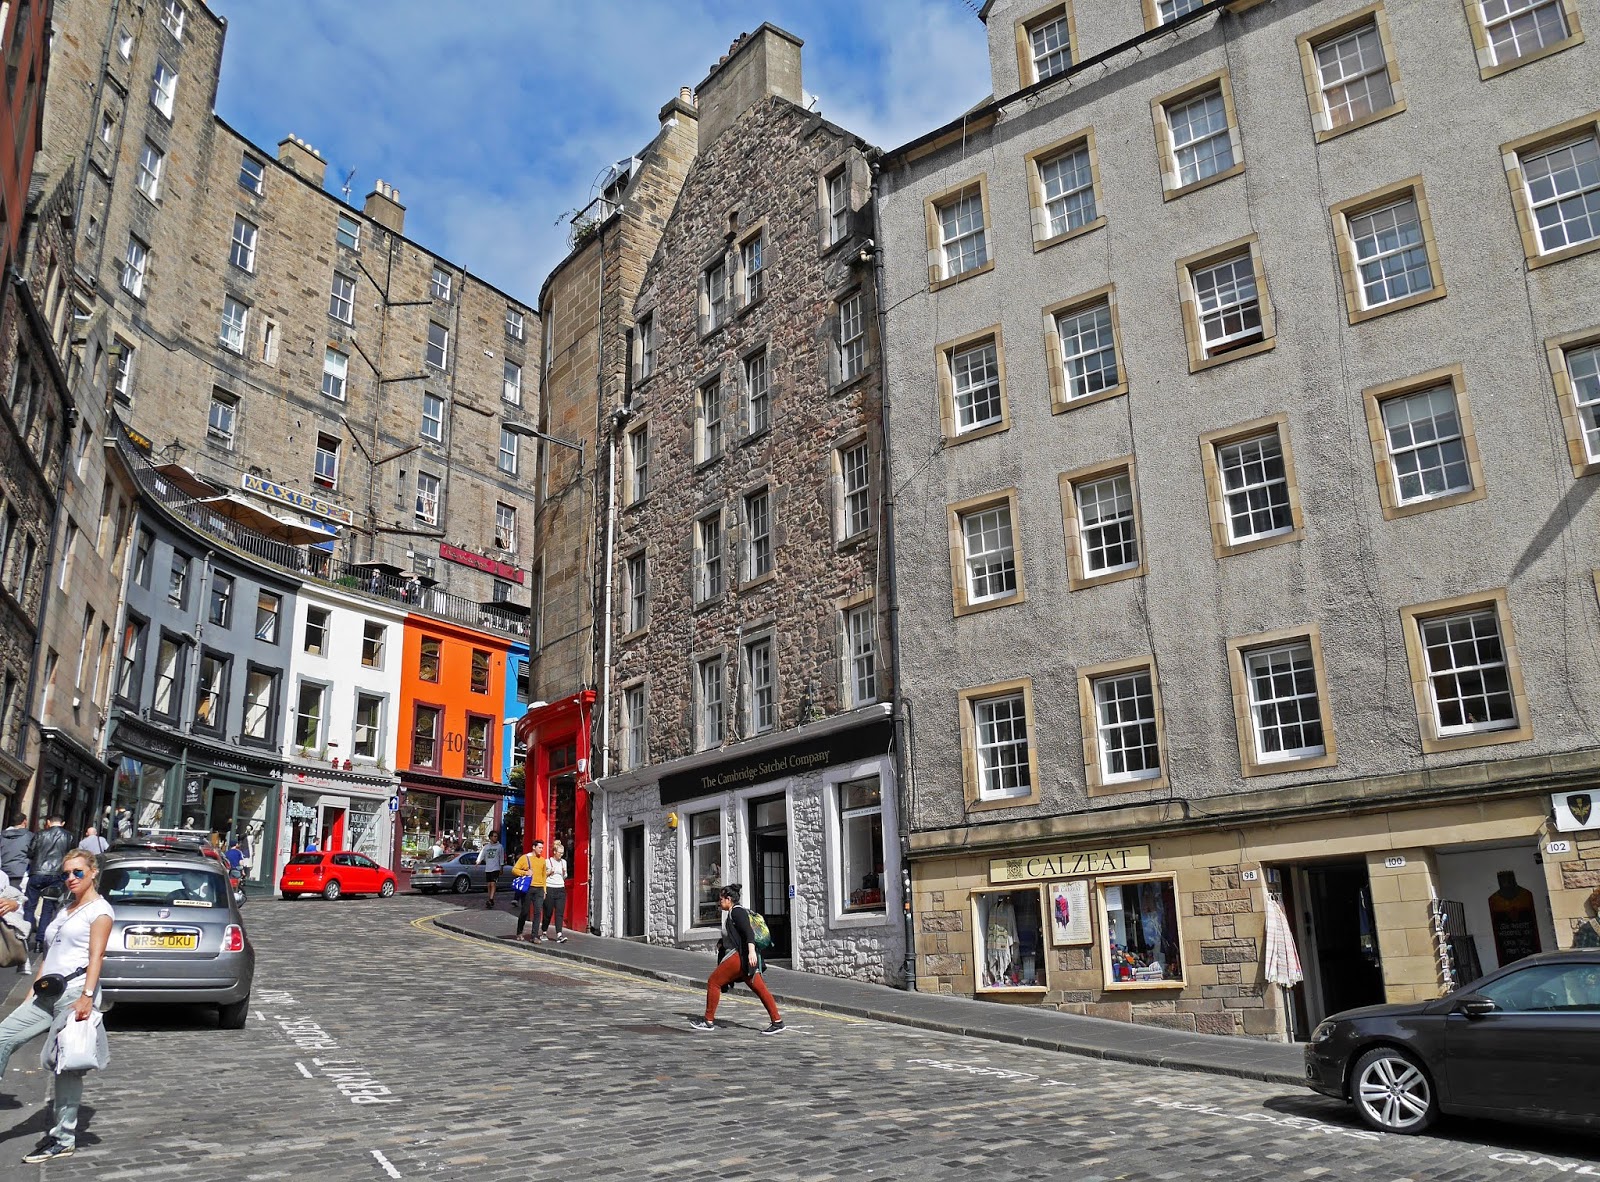 Why Edinburgh is the perfect place to visit for a stress